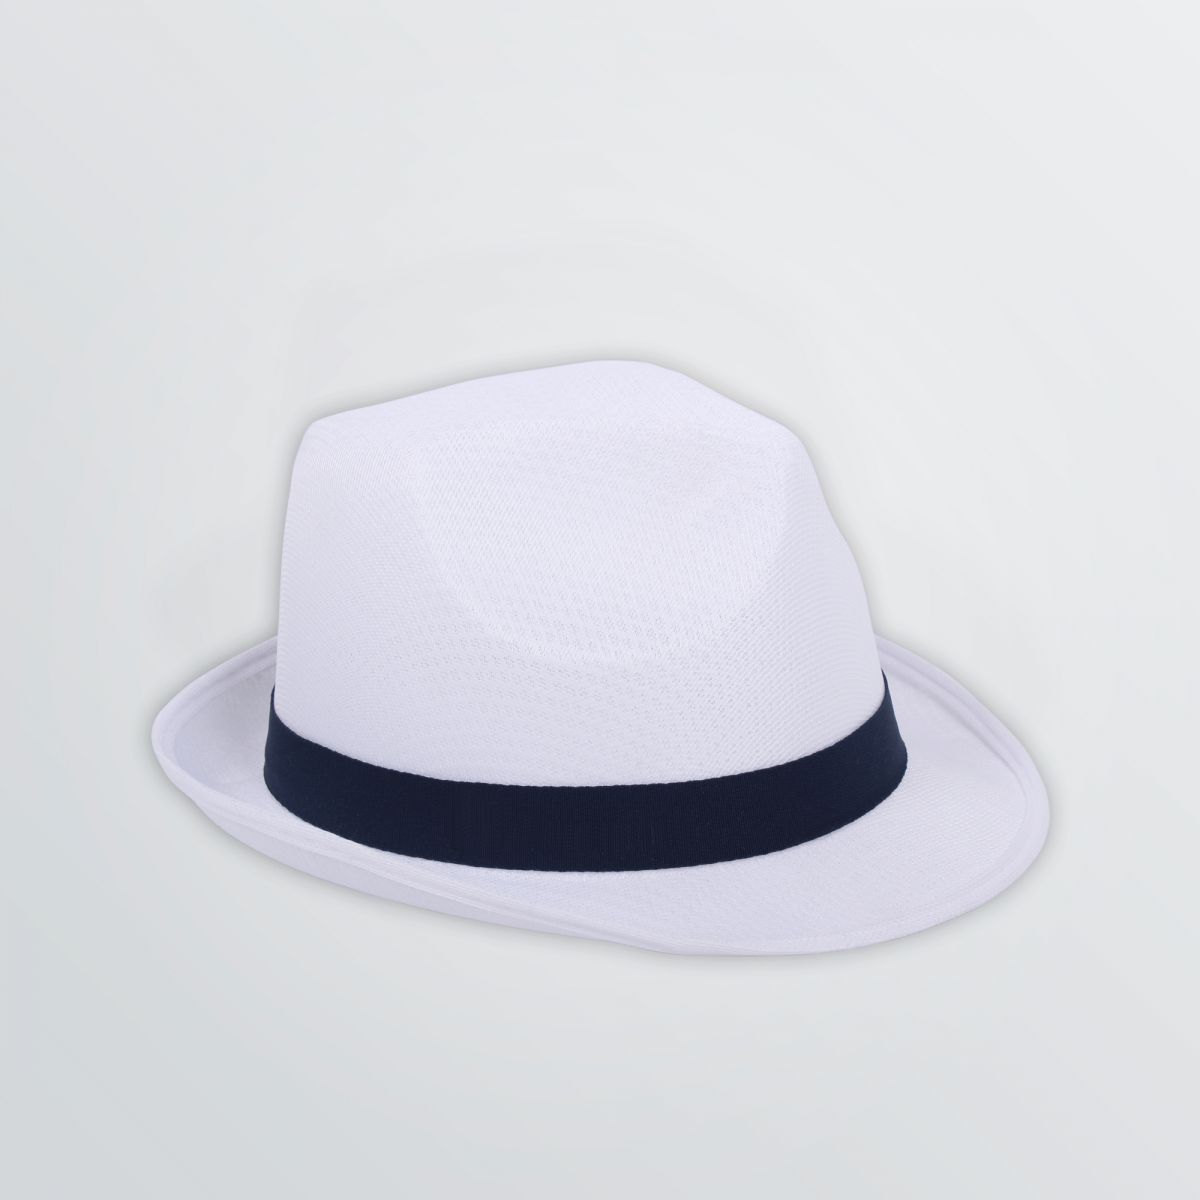 Promo Hat for customisation with white hatband in navy - side view left